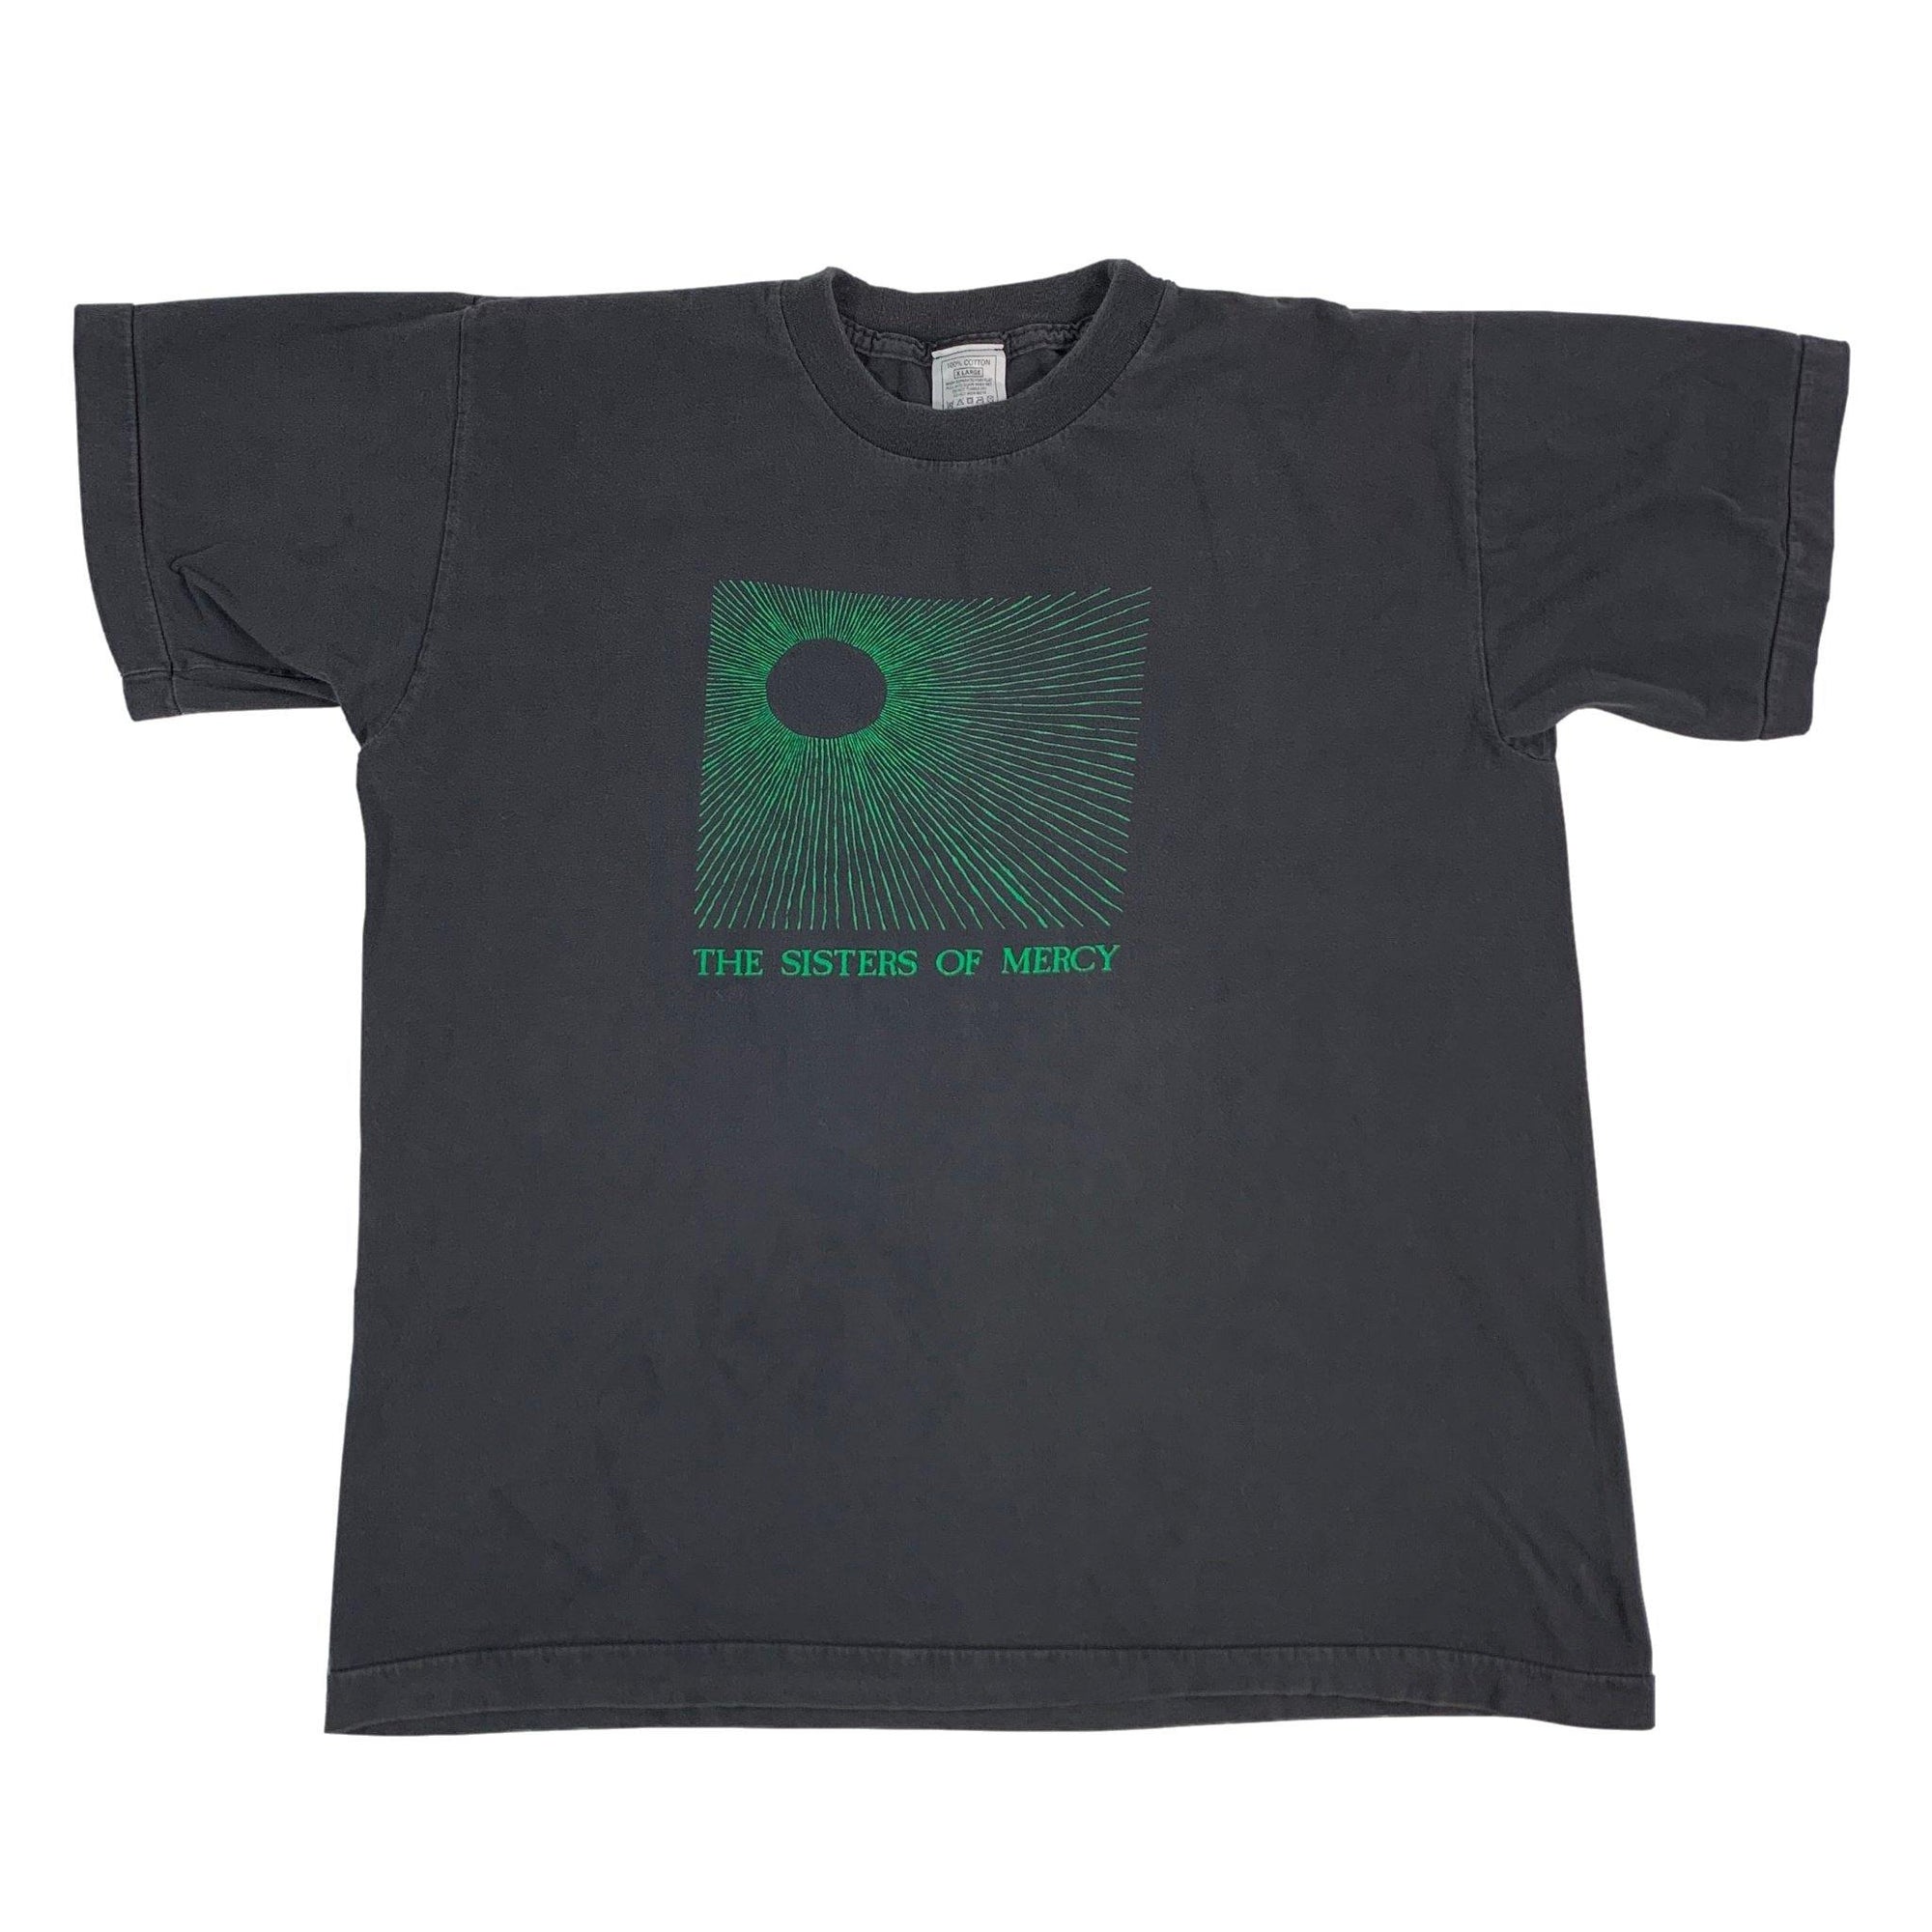 Vintage The Sisters Of Mercy "Merciful Release" T-Shirt - jointcustodydc